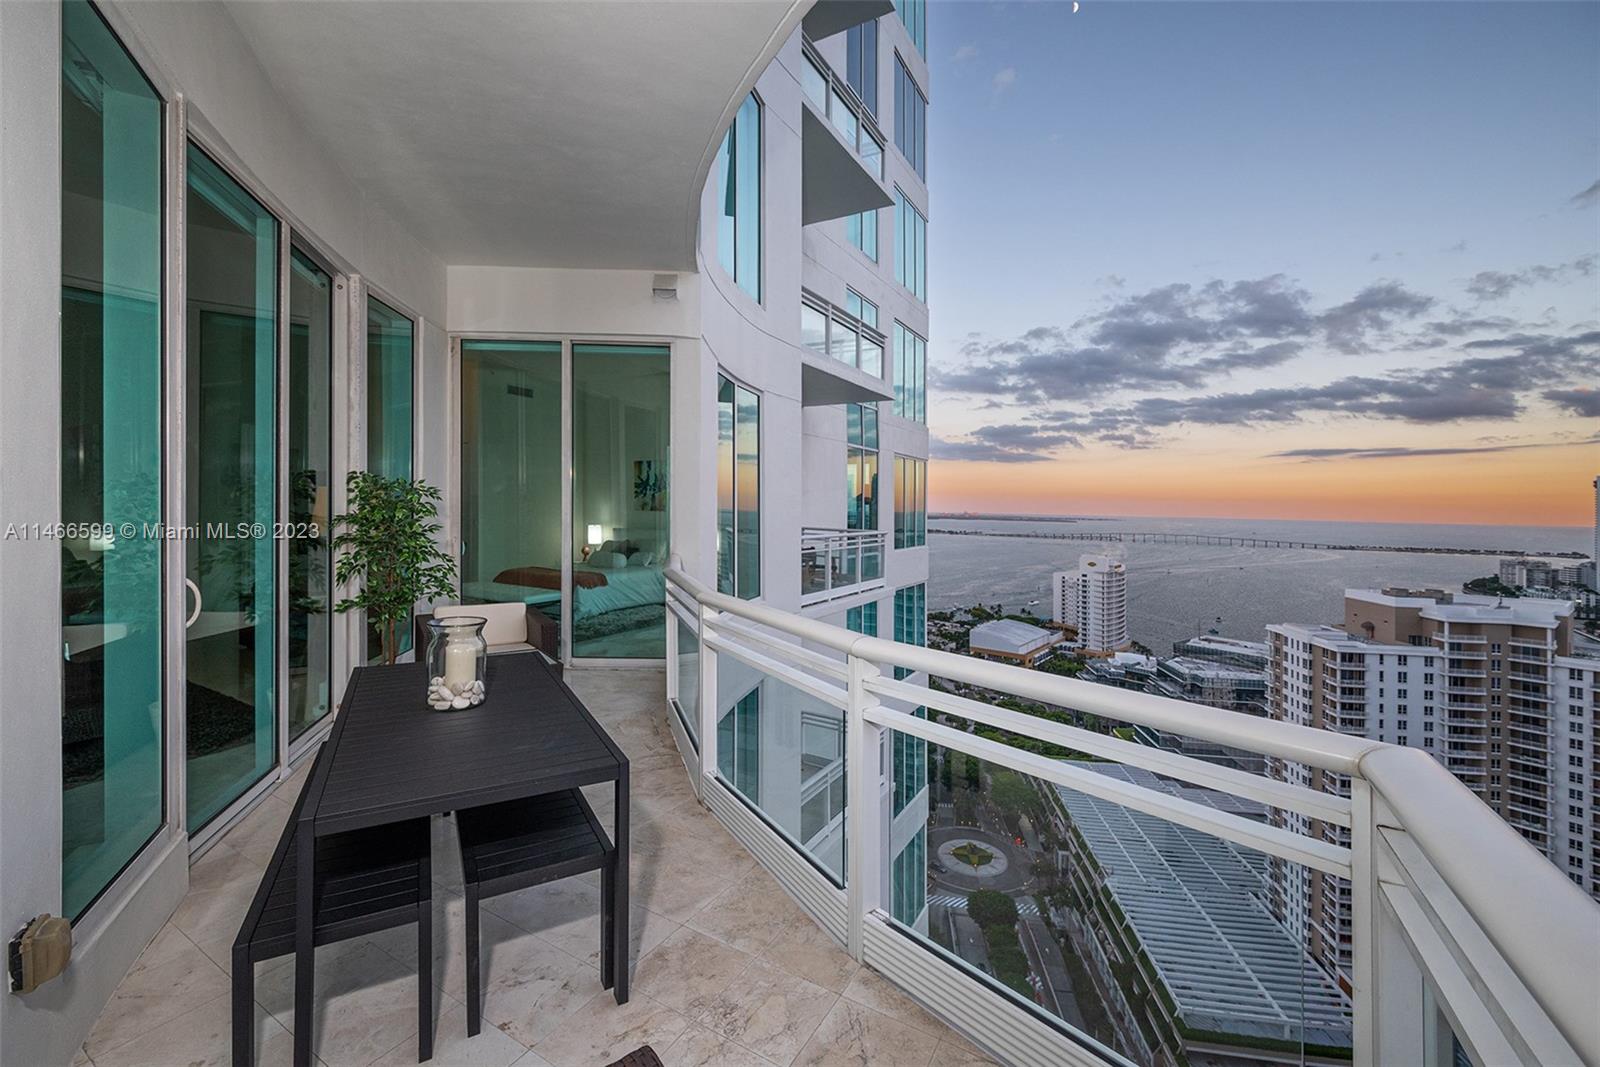 Set in the world-class gated island of Brickell Key, this 27th floor 2/2.5 split floor plan unit at the Asia Brickell Key can be yours. Just east of the Miami Brickell area, it offers a waterfront ultra-luxurious lifestyle, private elevator w/bio-metric secure controls that opens to a foyer, 12' ceilings & marble floors. The balcony overlooks the skyline, river & Biscayne Bay. Others: smart home, floor-to-ceiling windows, Subzero fridge, Miele kitchen, Bosch W/D & custom closets. Primary bath w/marble shower, Jacuzzi & WC. An extra storage room & 2 tandem garage parking spaces. Amenities: 24hr security/front desk, lobby, fitness center, pools, sauna, racquetball/basketball, tennis court, valet for guests, meeting room. Partially furnished by Artefacto. Only 1 owner rarely used as 2nd home.